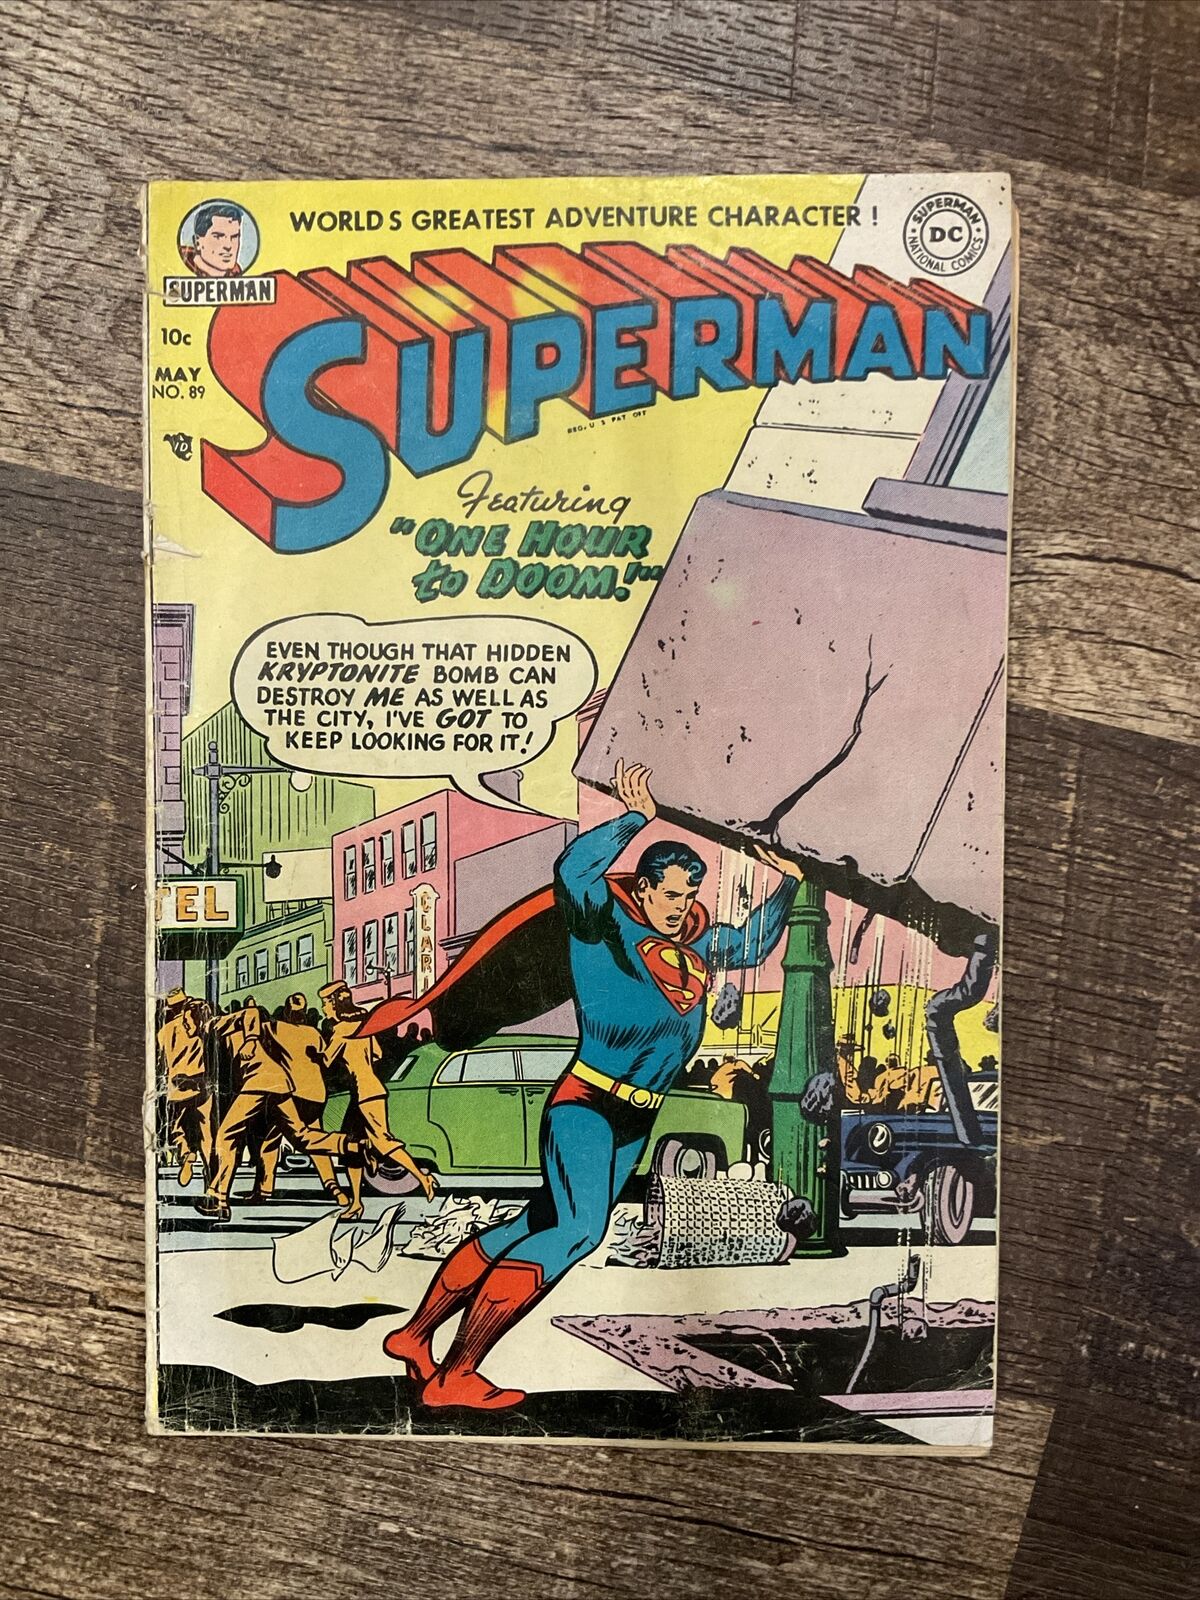 Superman #89 (1954) G 1st Curt Swan cover in title KEY